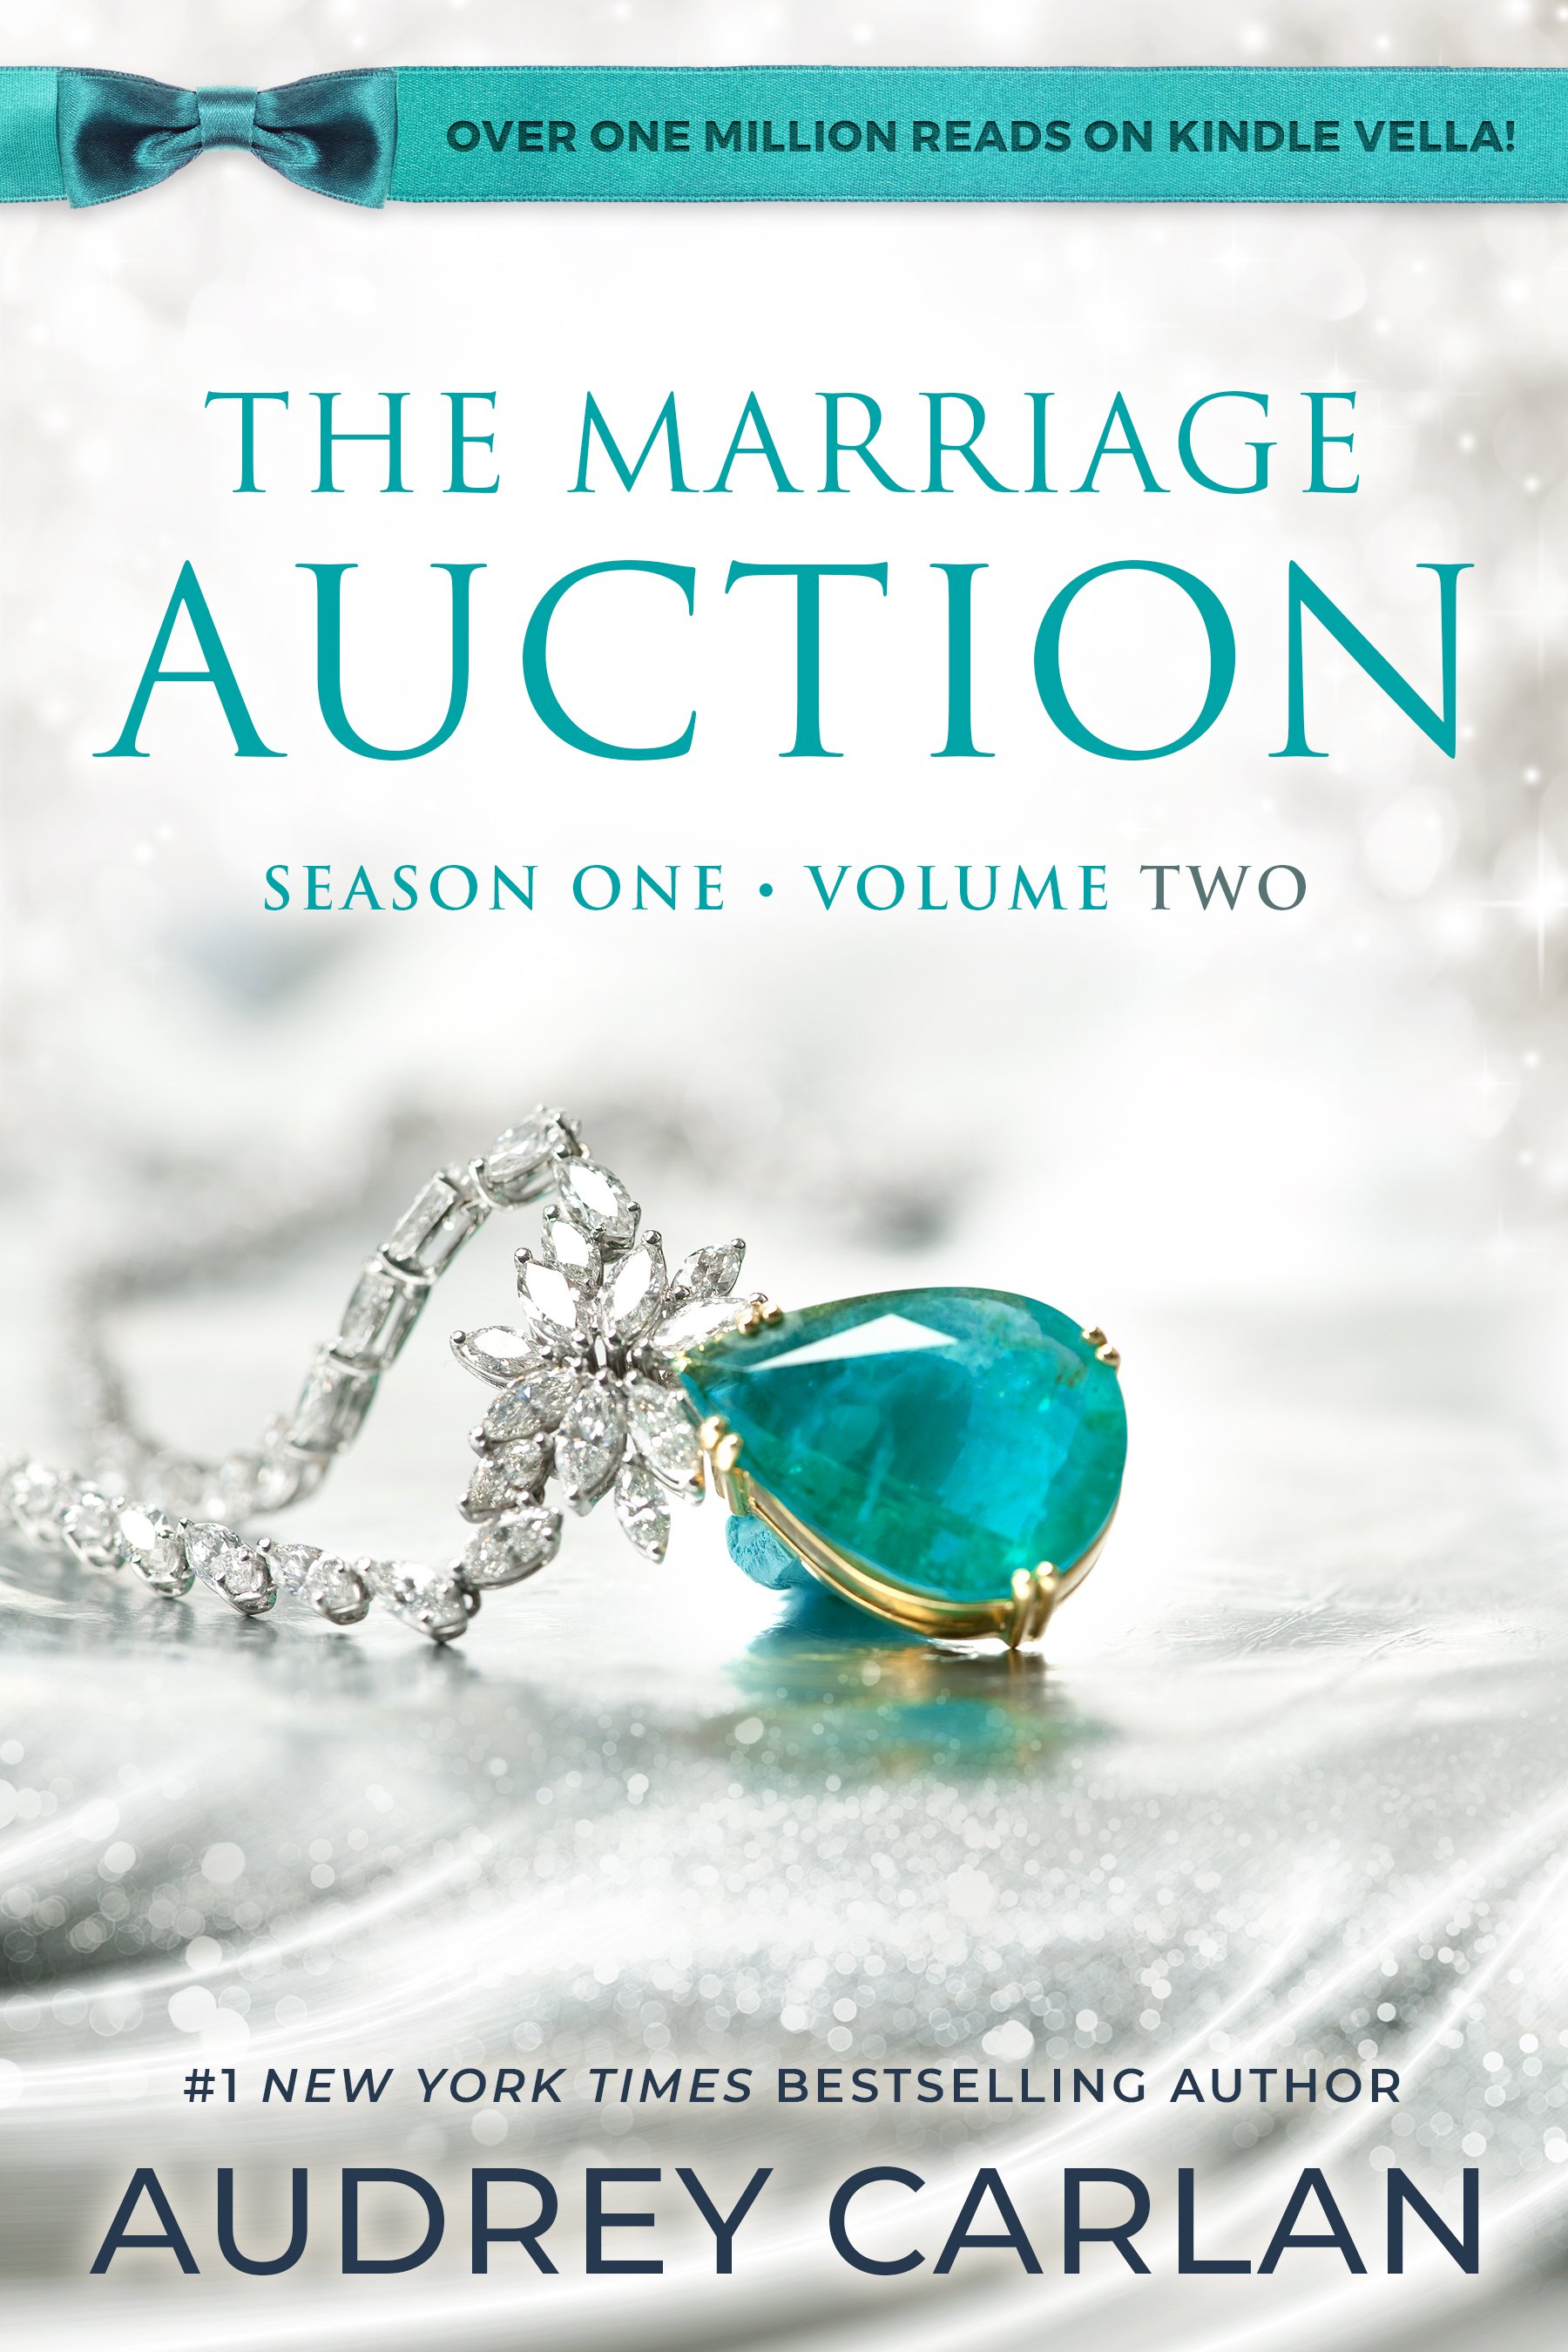 The Marriage Auction_book 2_300dpi.jpg